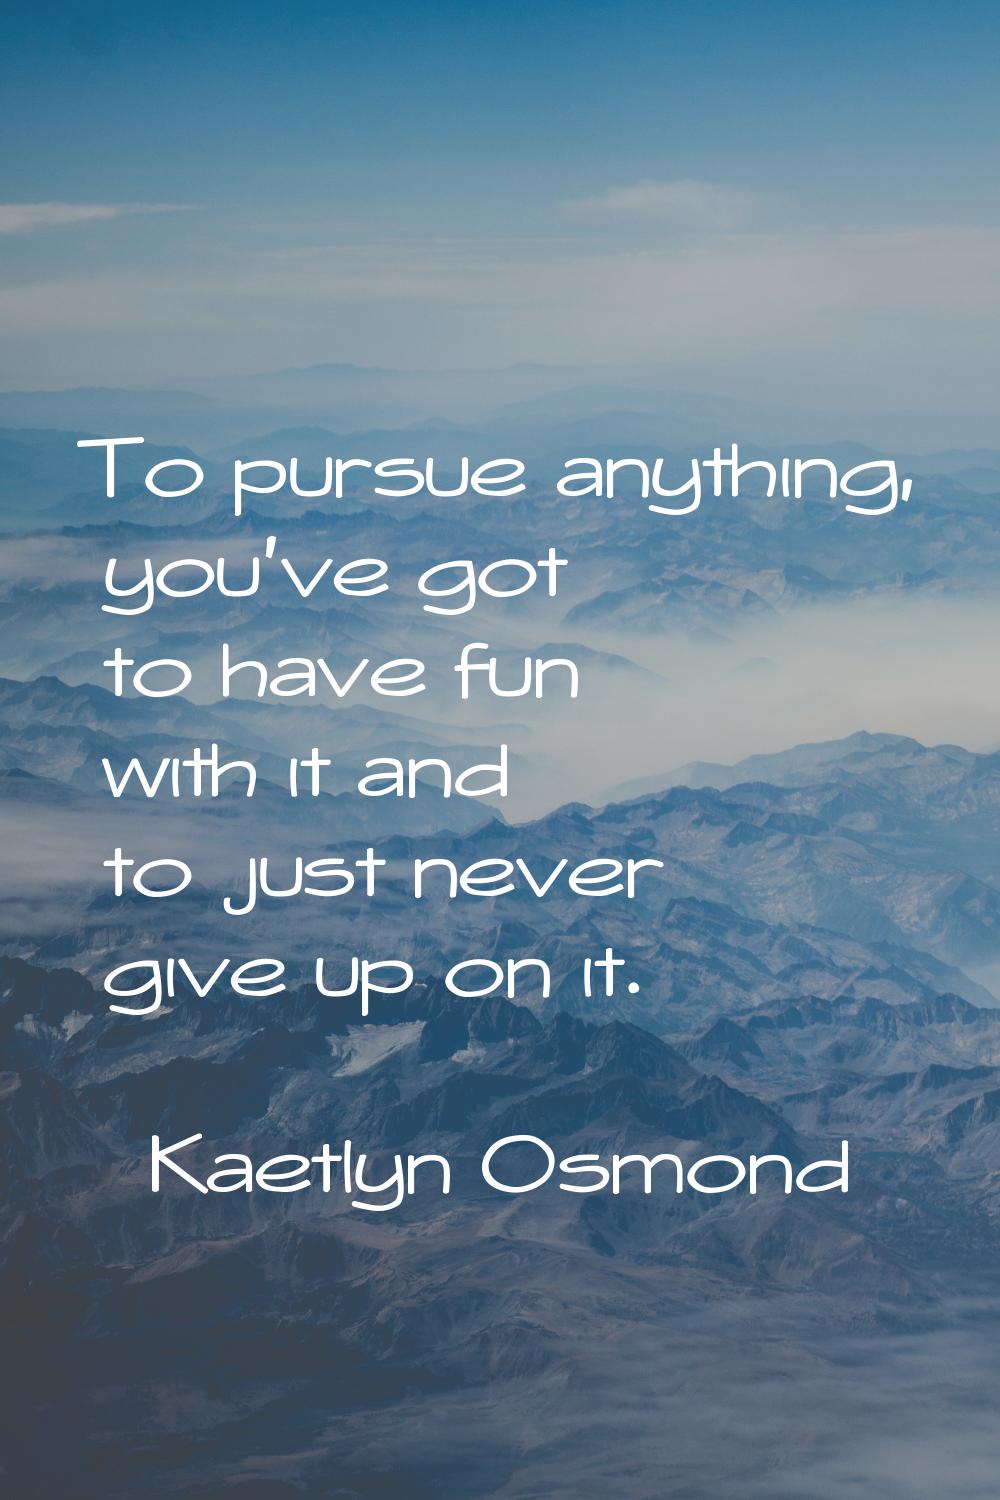 To pursue anything, you've got to have fun with it and to just never give up on it.